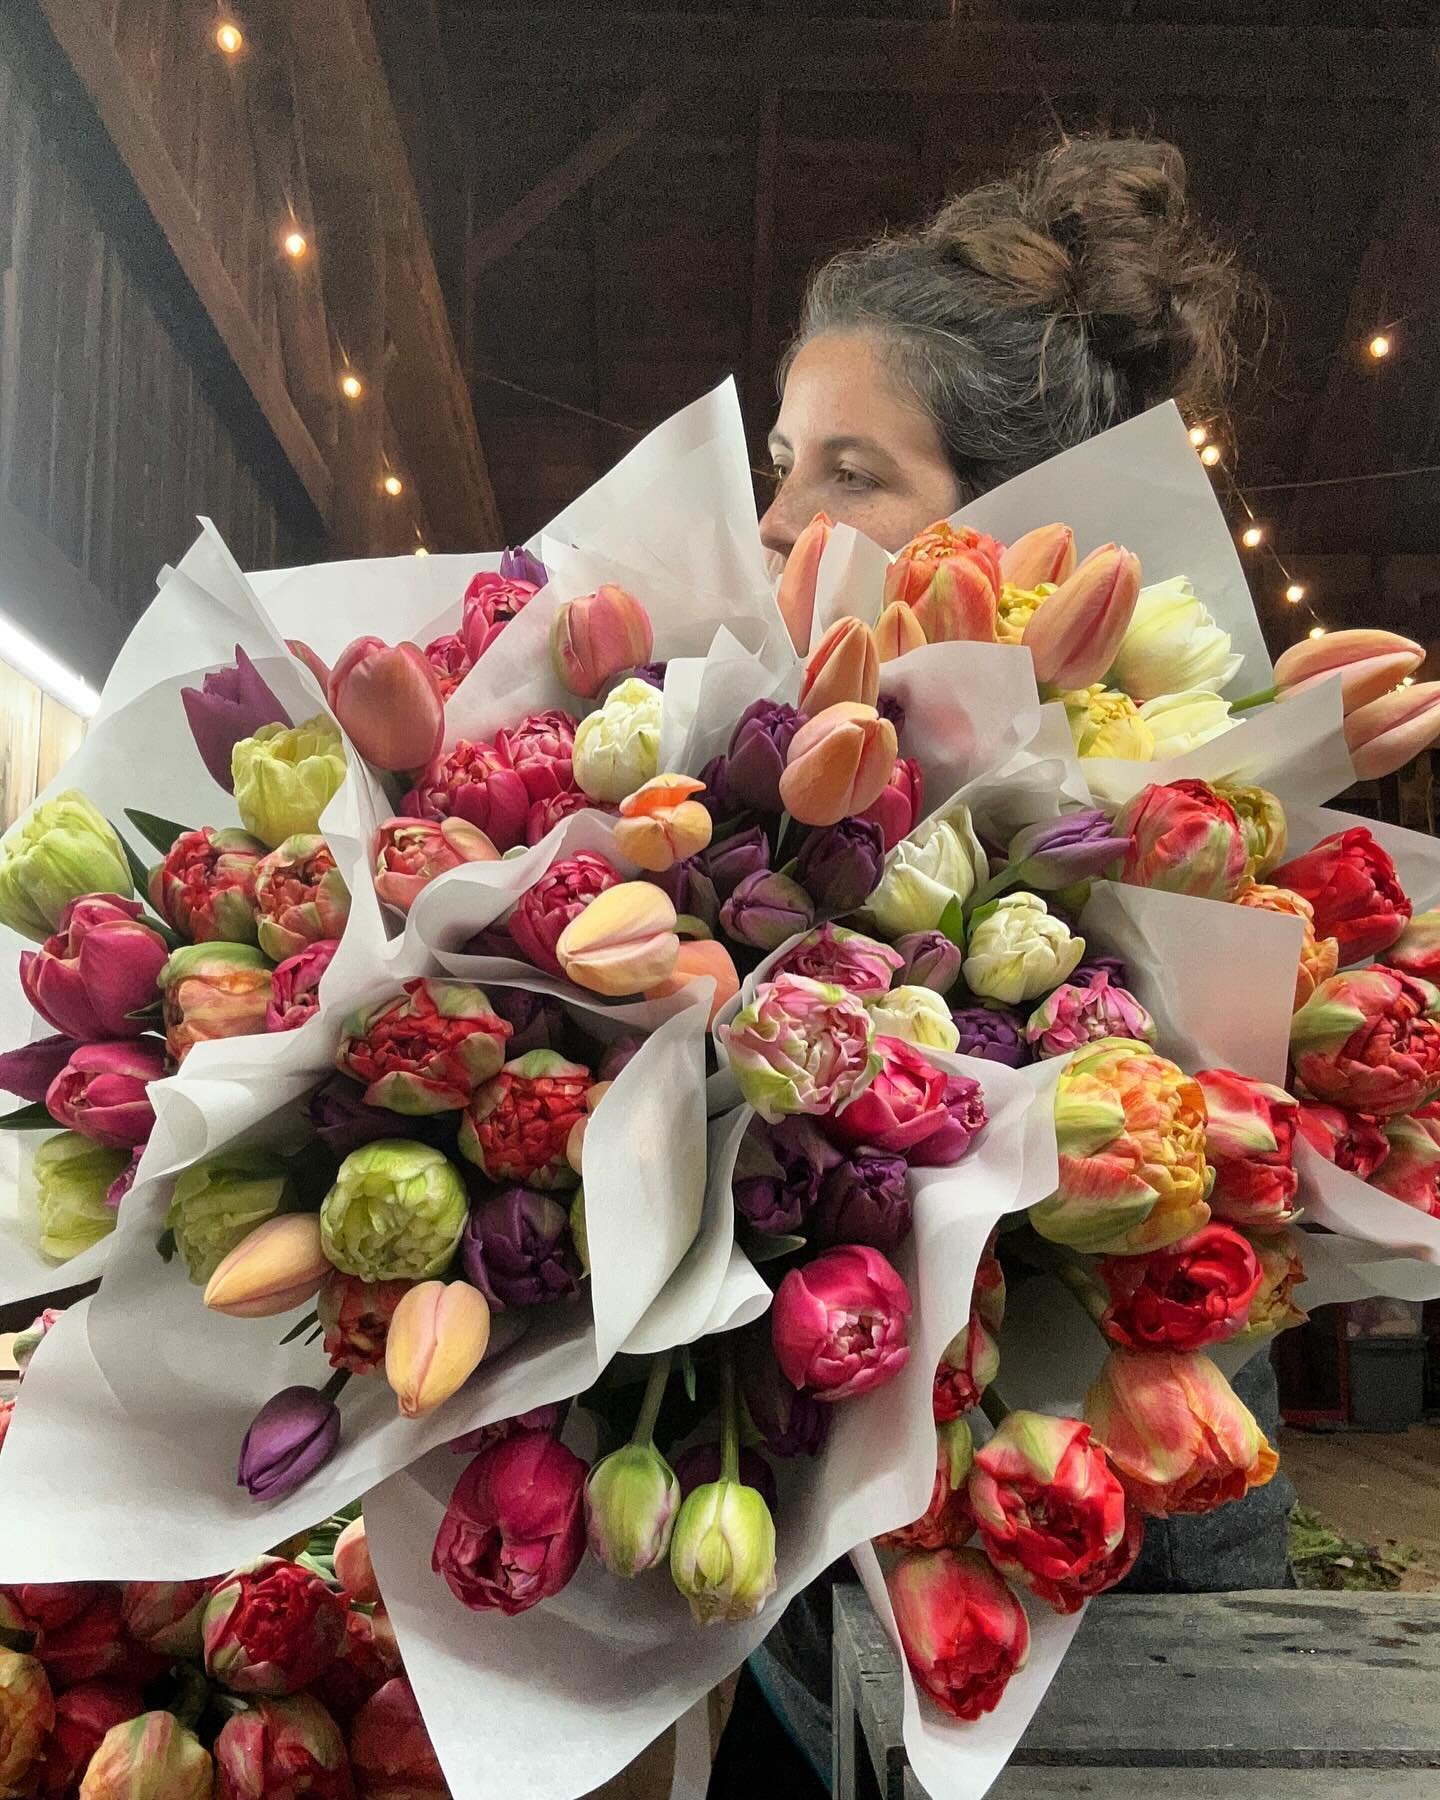 Sunday morning at the stand.

🌸$25 Tulip bouquets are restocked! We&rsquo;ll be closed Monday-Wednesday to prep for Mother&rsquo;s Day weekend.

🌸Pre-orders for Mother&rsquo;s Day flowers close Monday evening. Your local flower farmers and florists